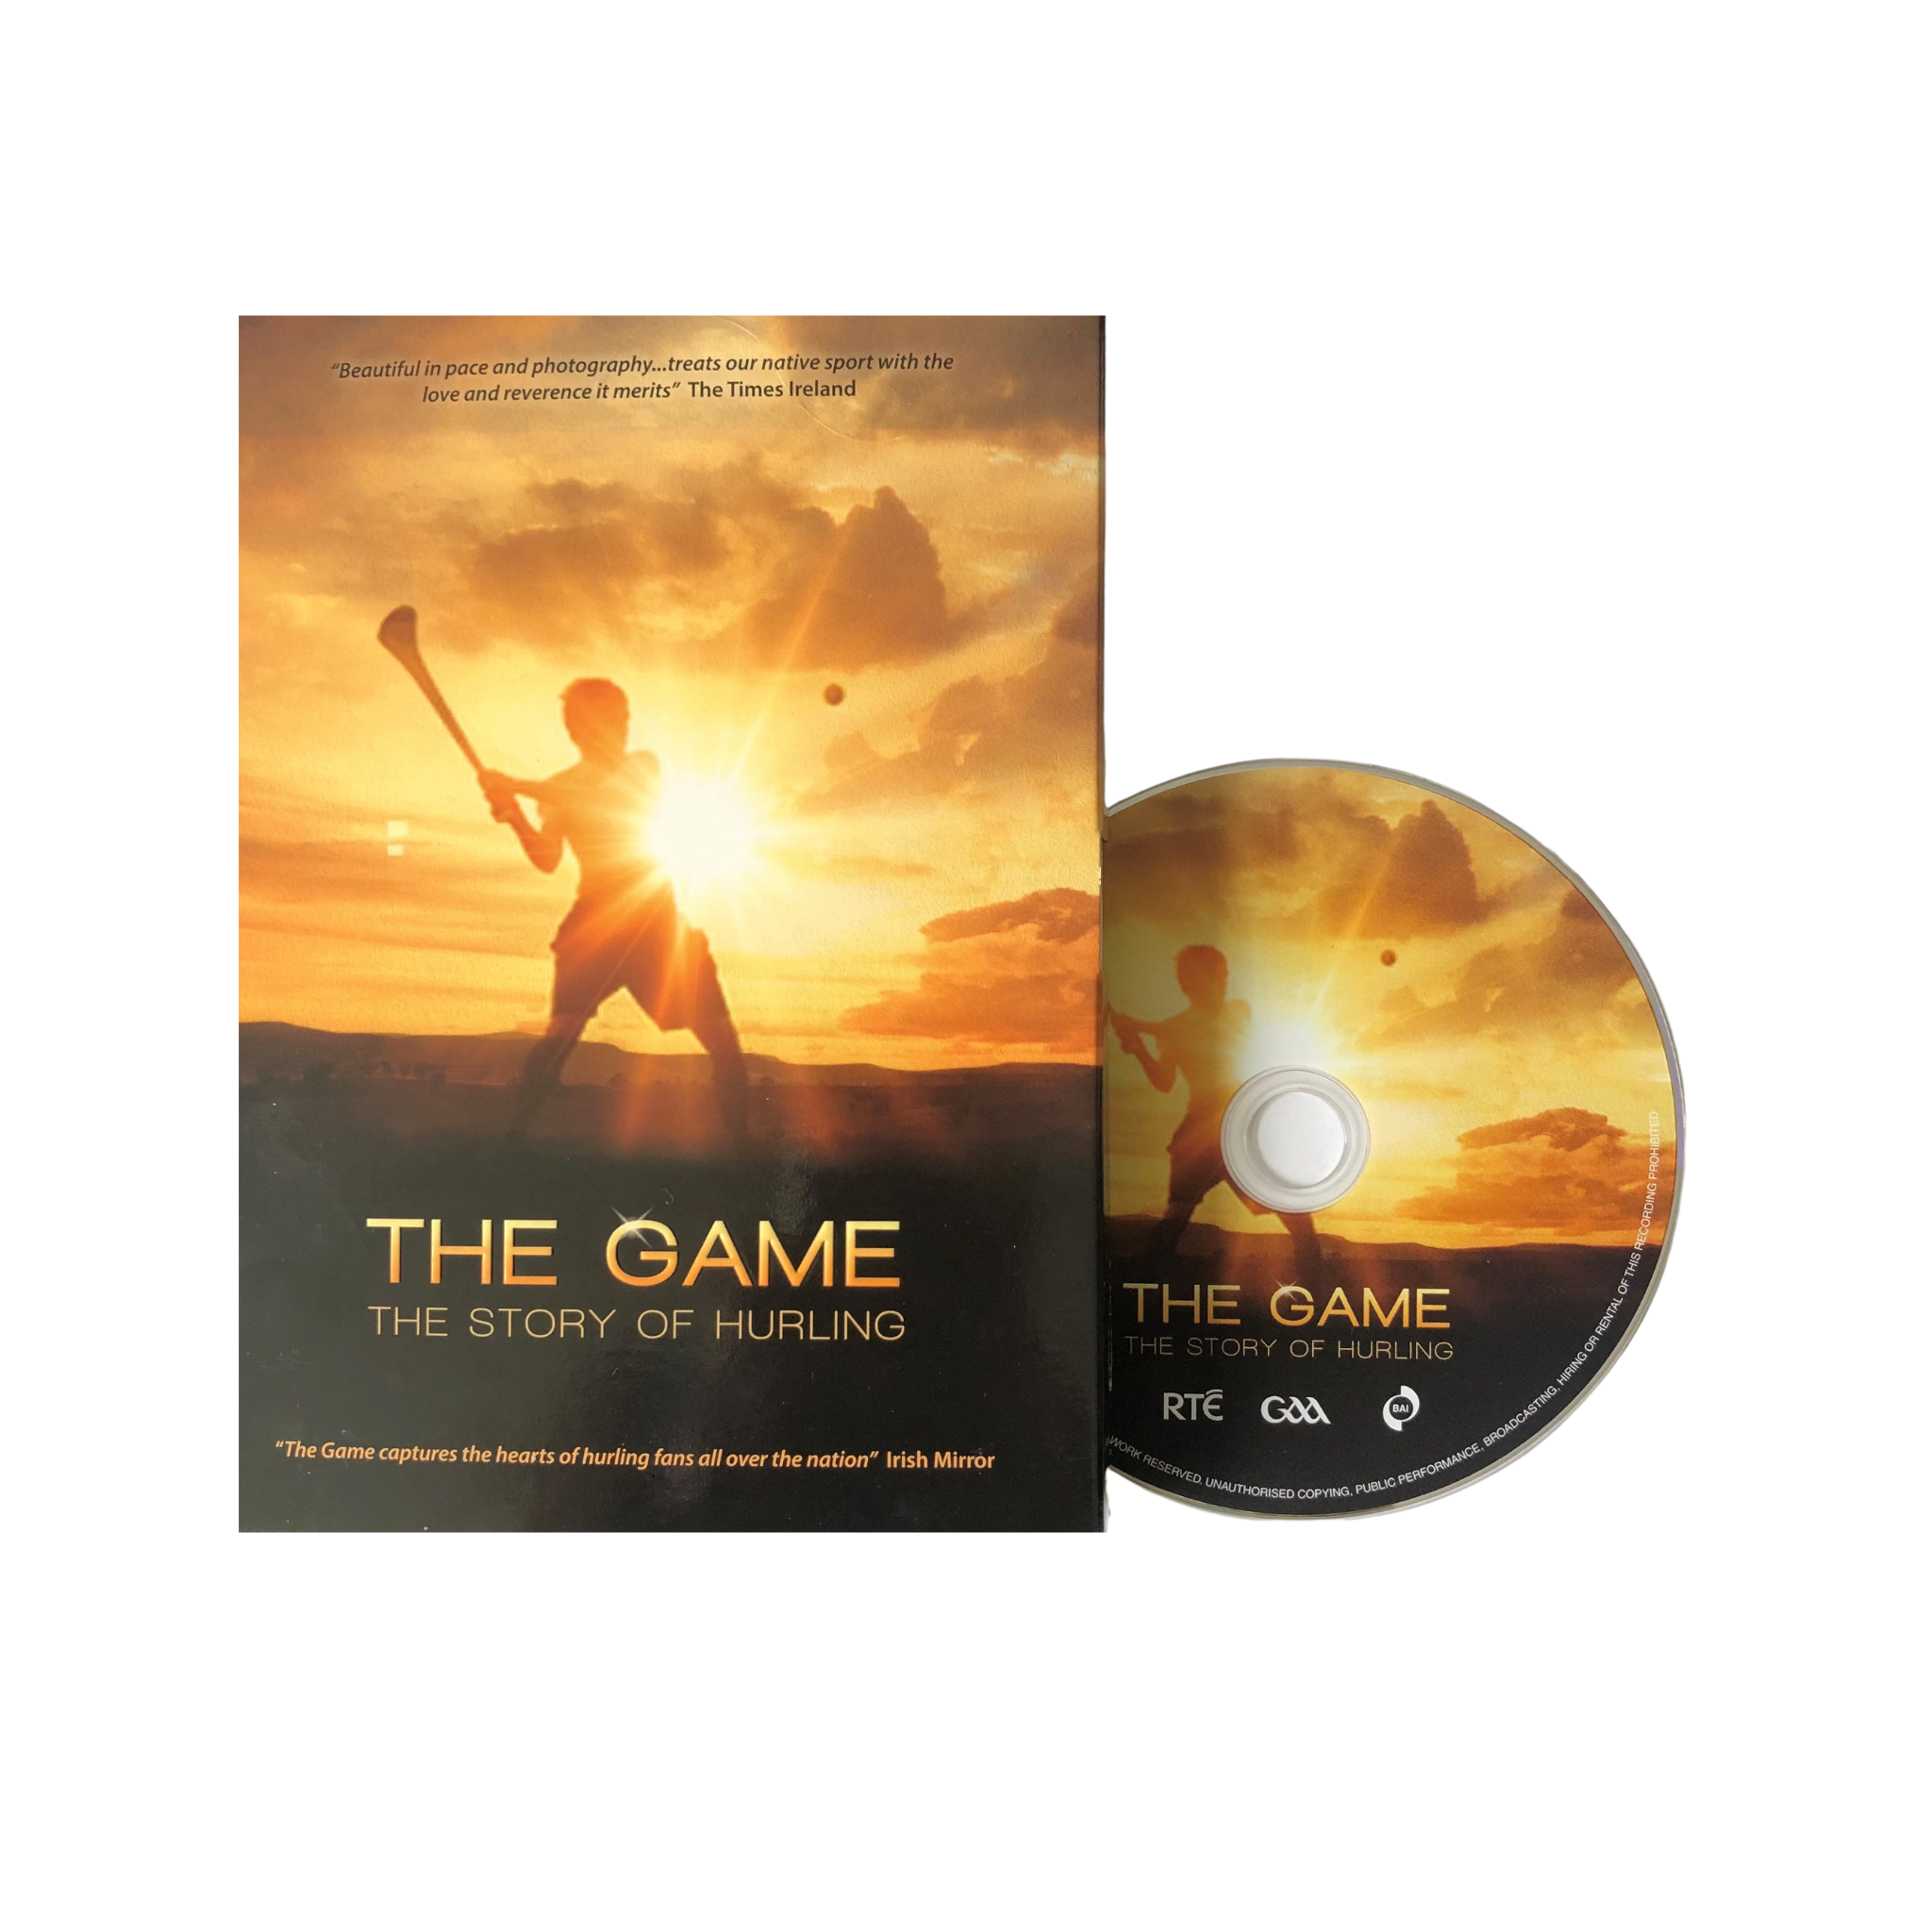 The Game - the story of hurling DVD